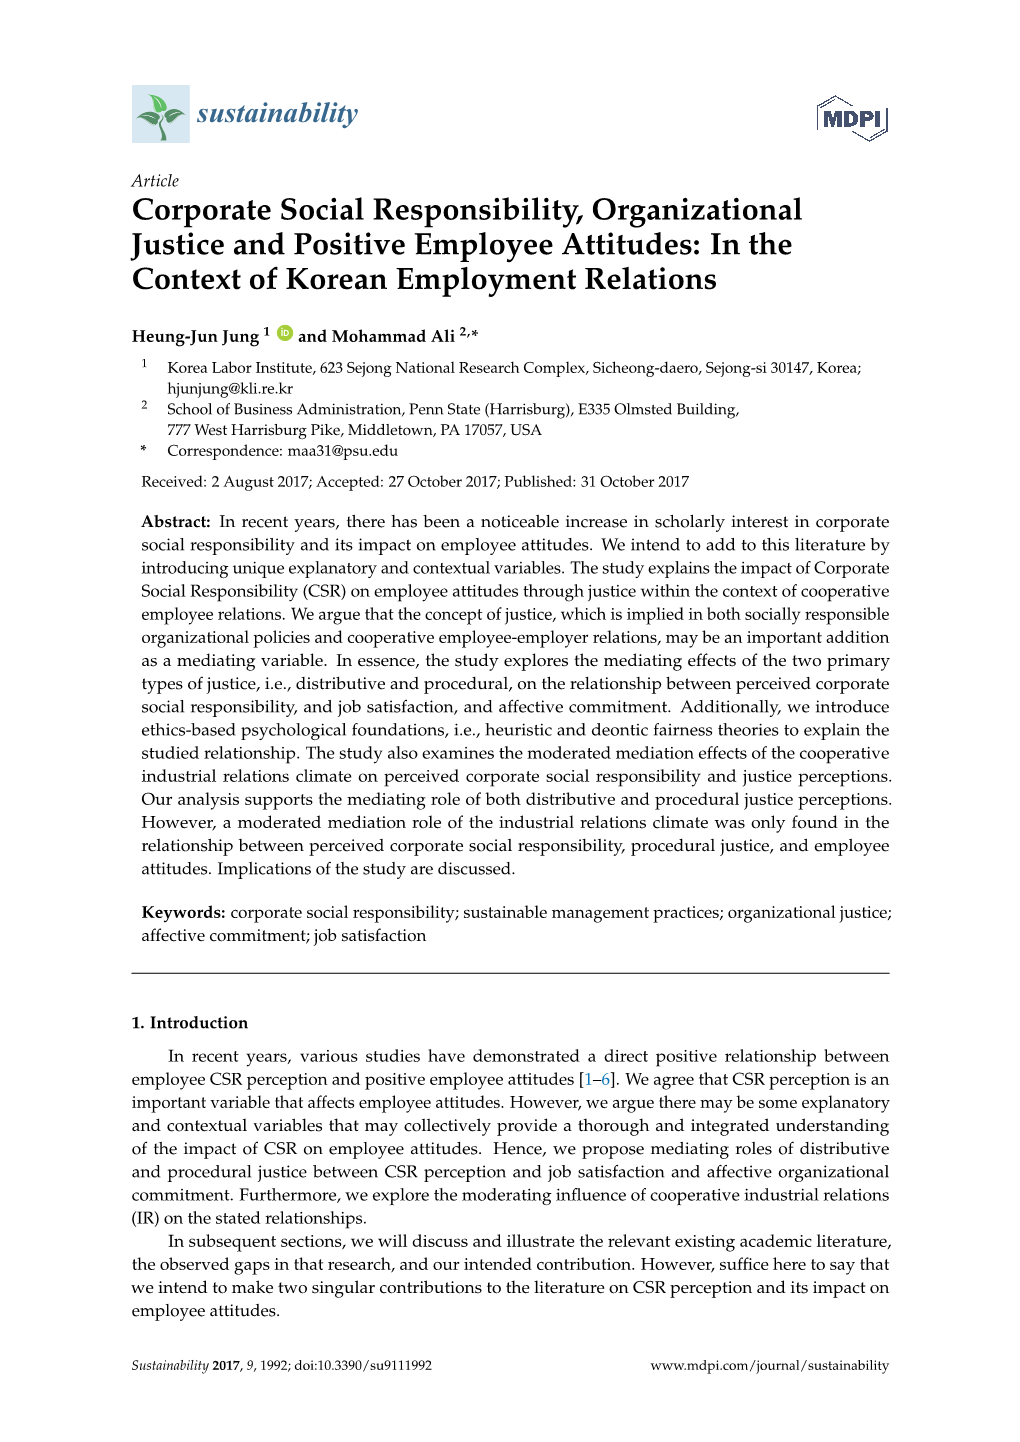 Corporate Social Responsibility, Organizational Justice and Positive Employee Attitudes: in the Context of Korean Employment Relations